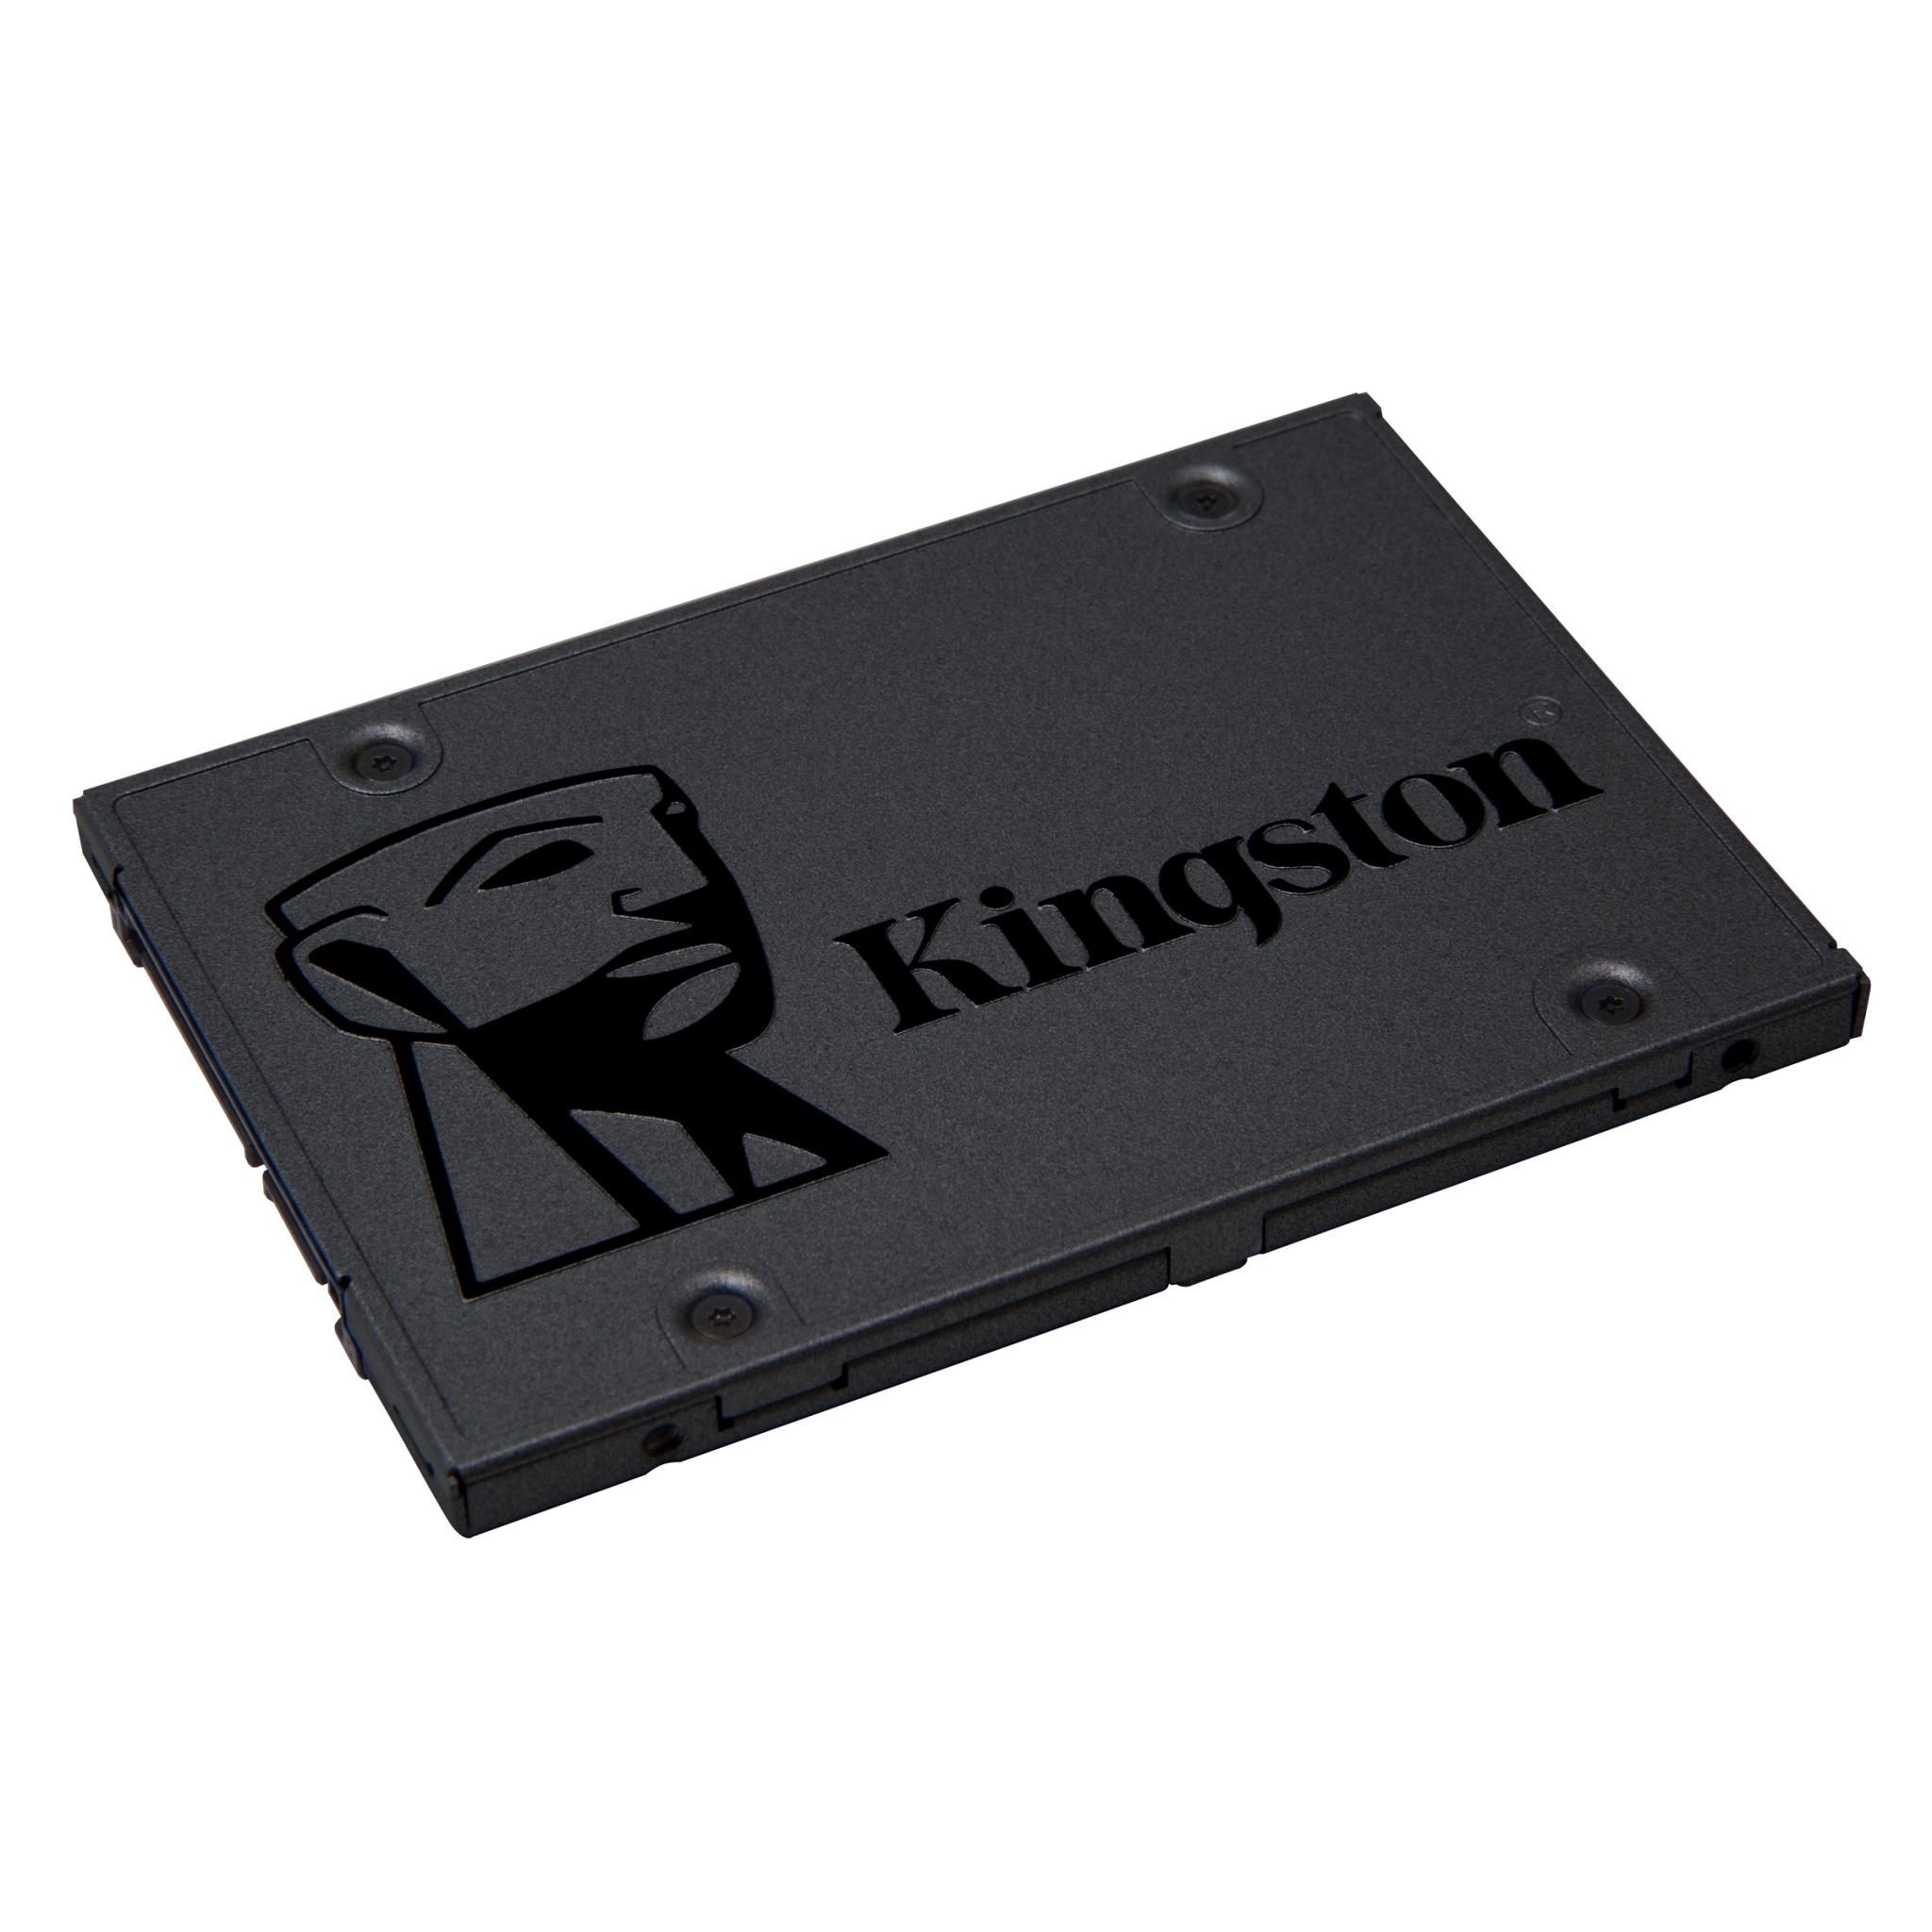 Køb Alle rygte 480GB Kingston A400 2.5-inch Solid State Drive